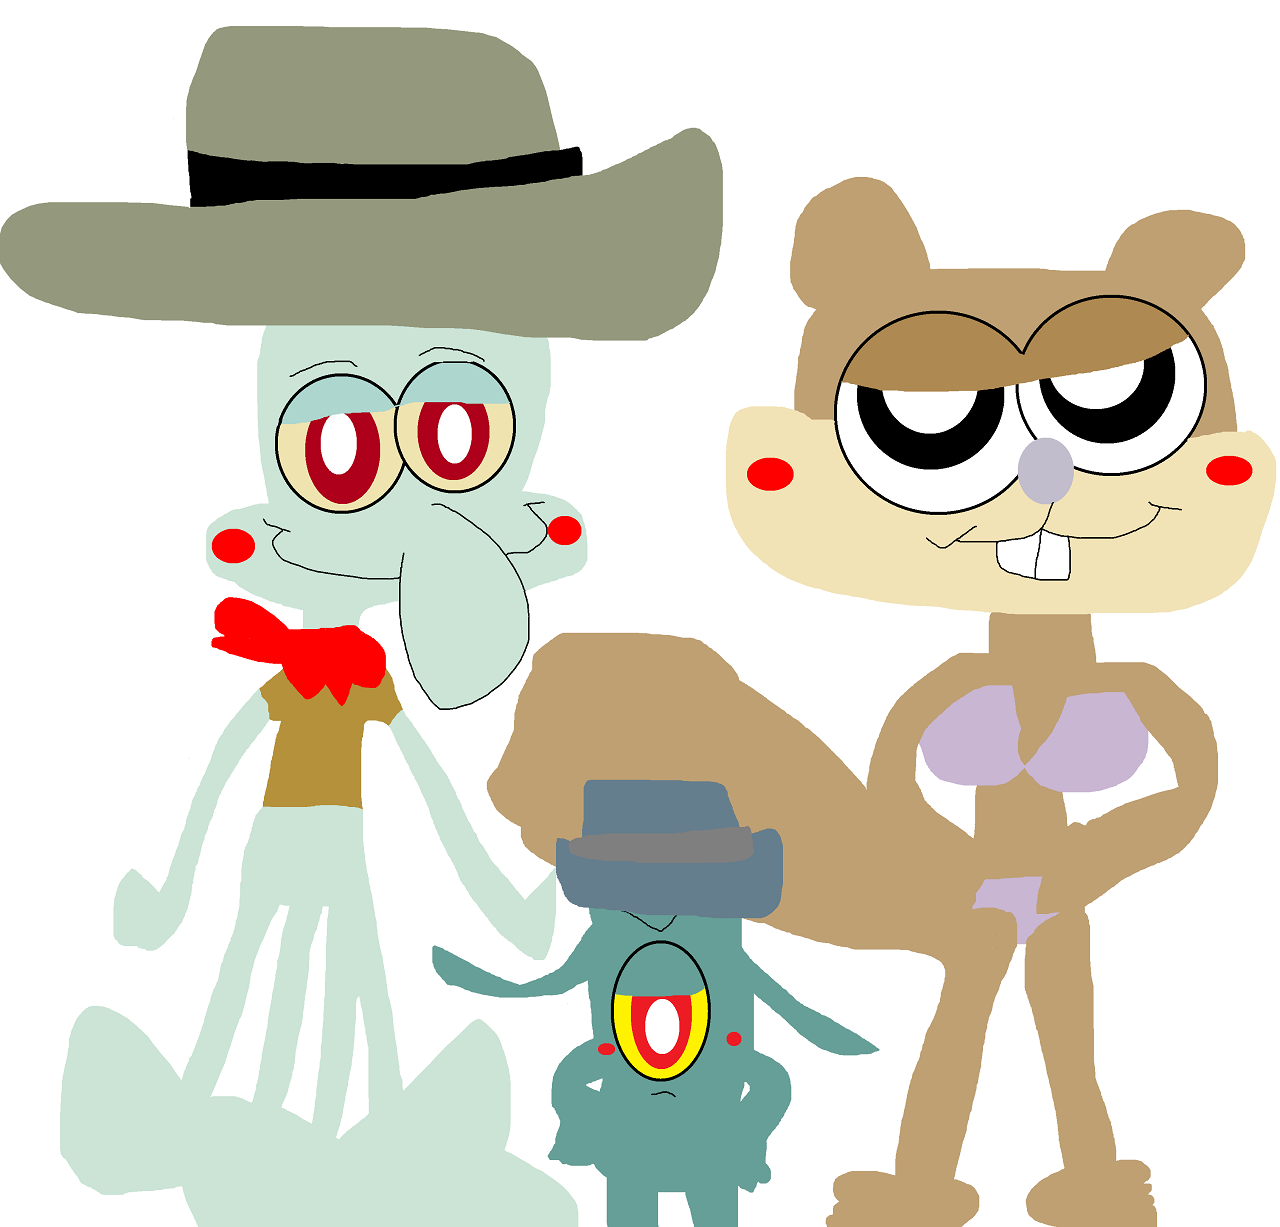 Cowboy Hat Squidie And Sandy Plankton Added by Falconlobo